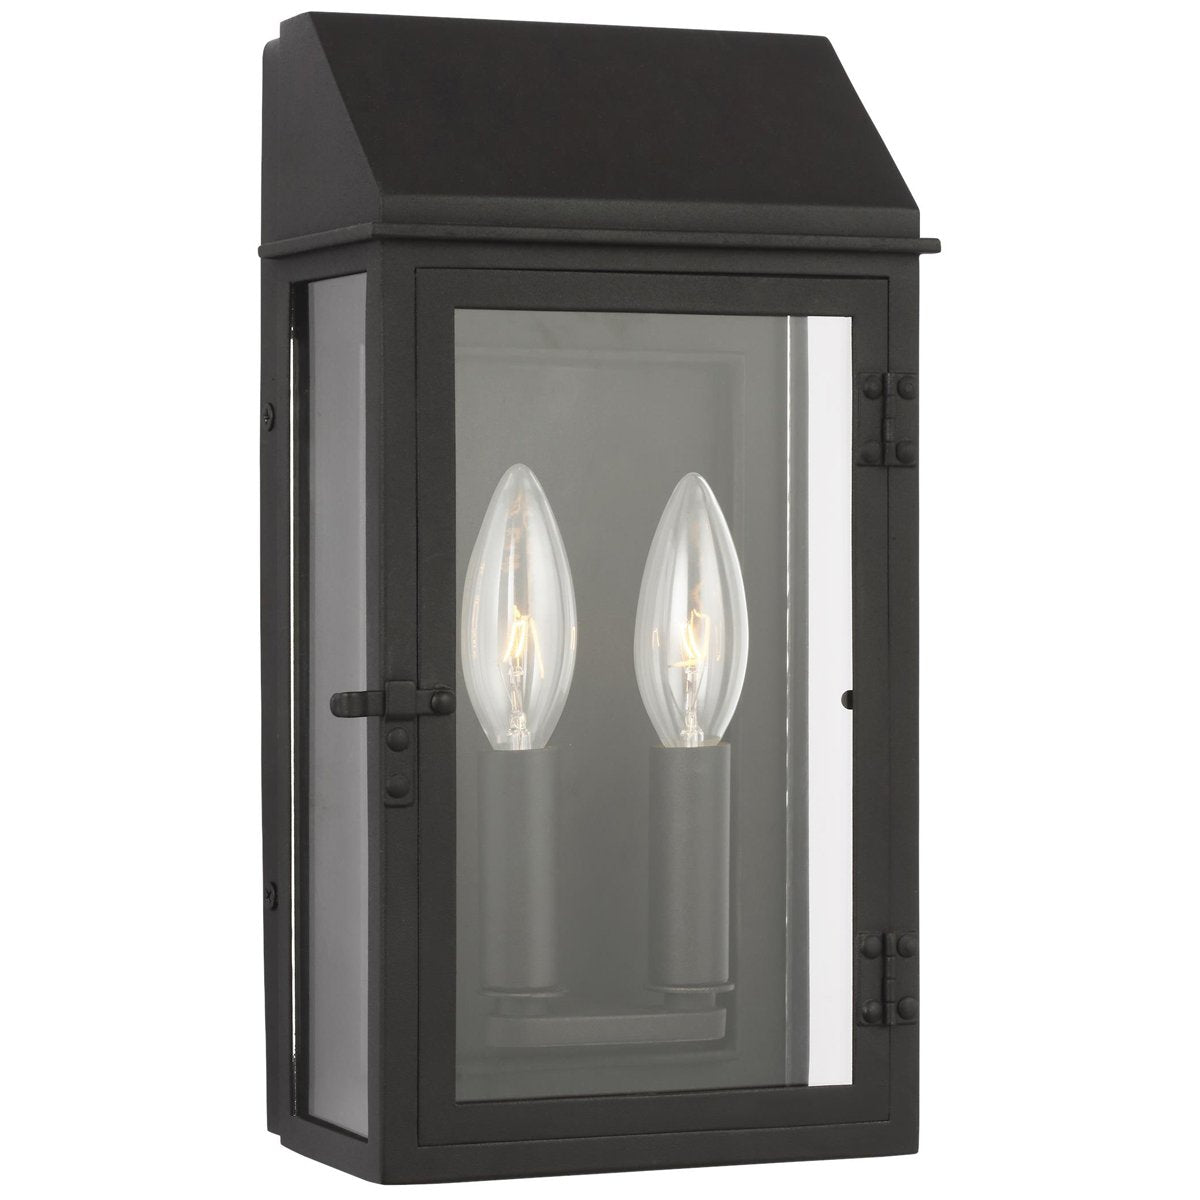 Feiss Hingham Small Outdoor Wall Lantern